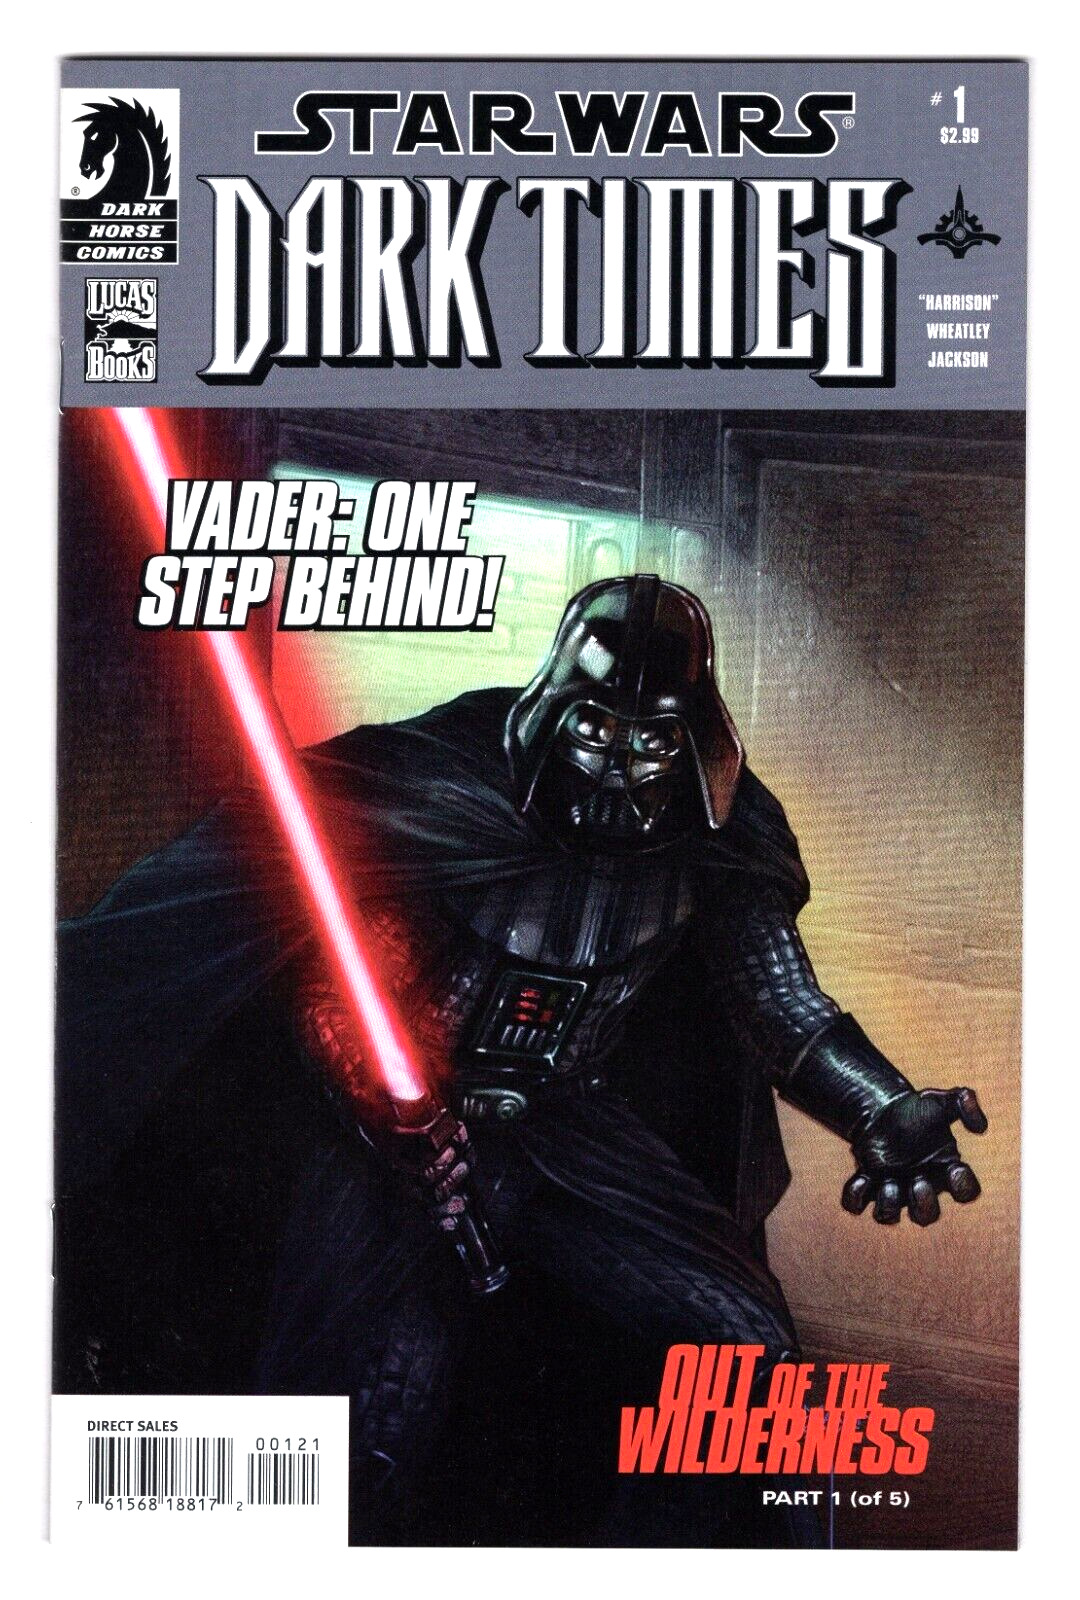 Star Wars: Dark Times #1 Out of the Wilderness 1:5 Incentive 2006 Dark Horse OOP